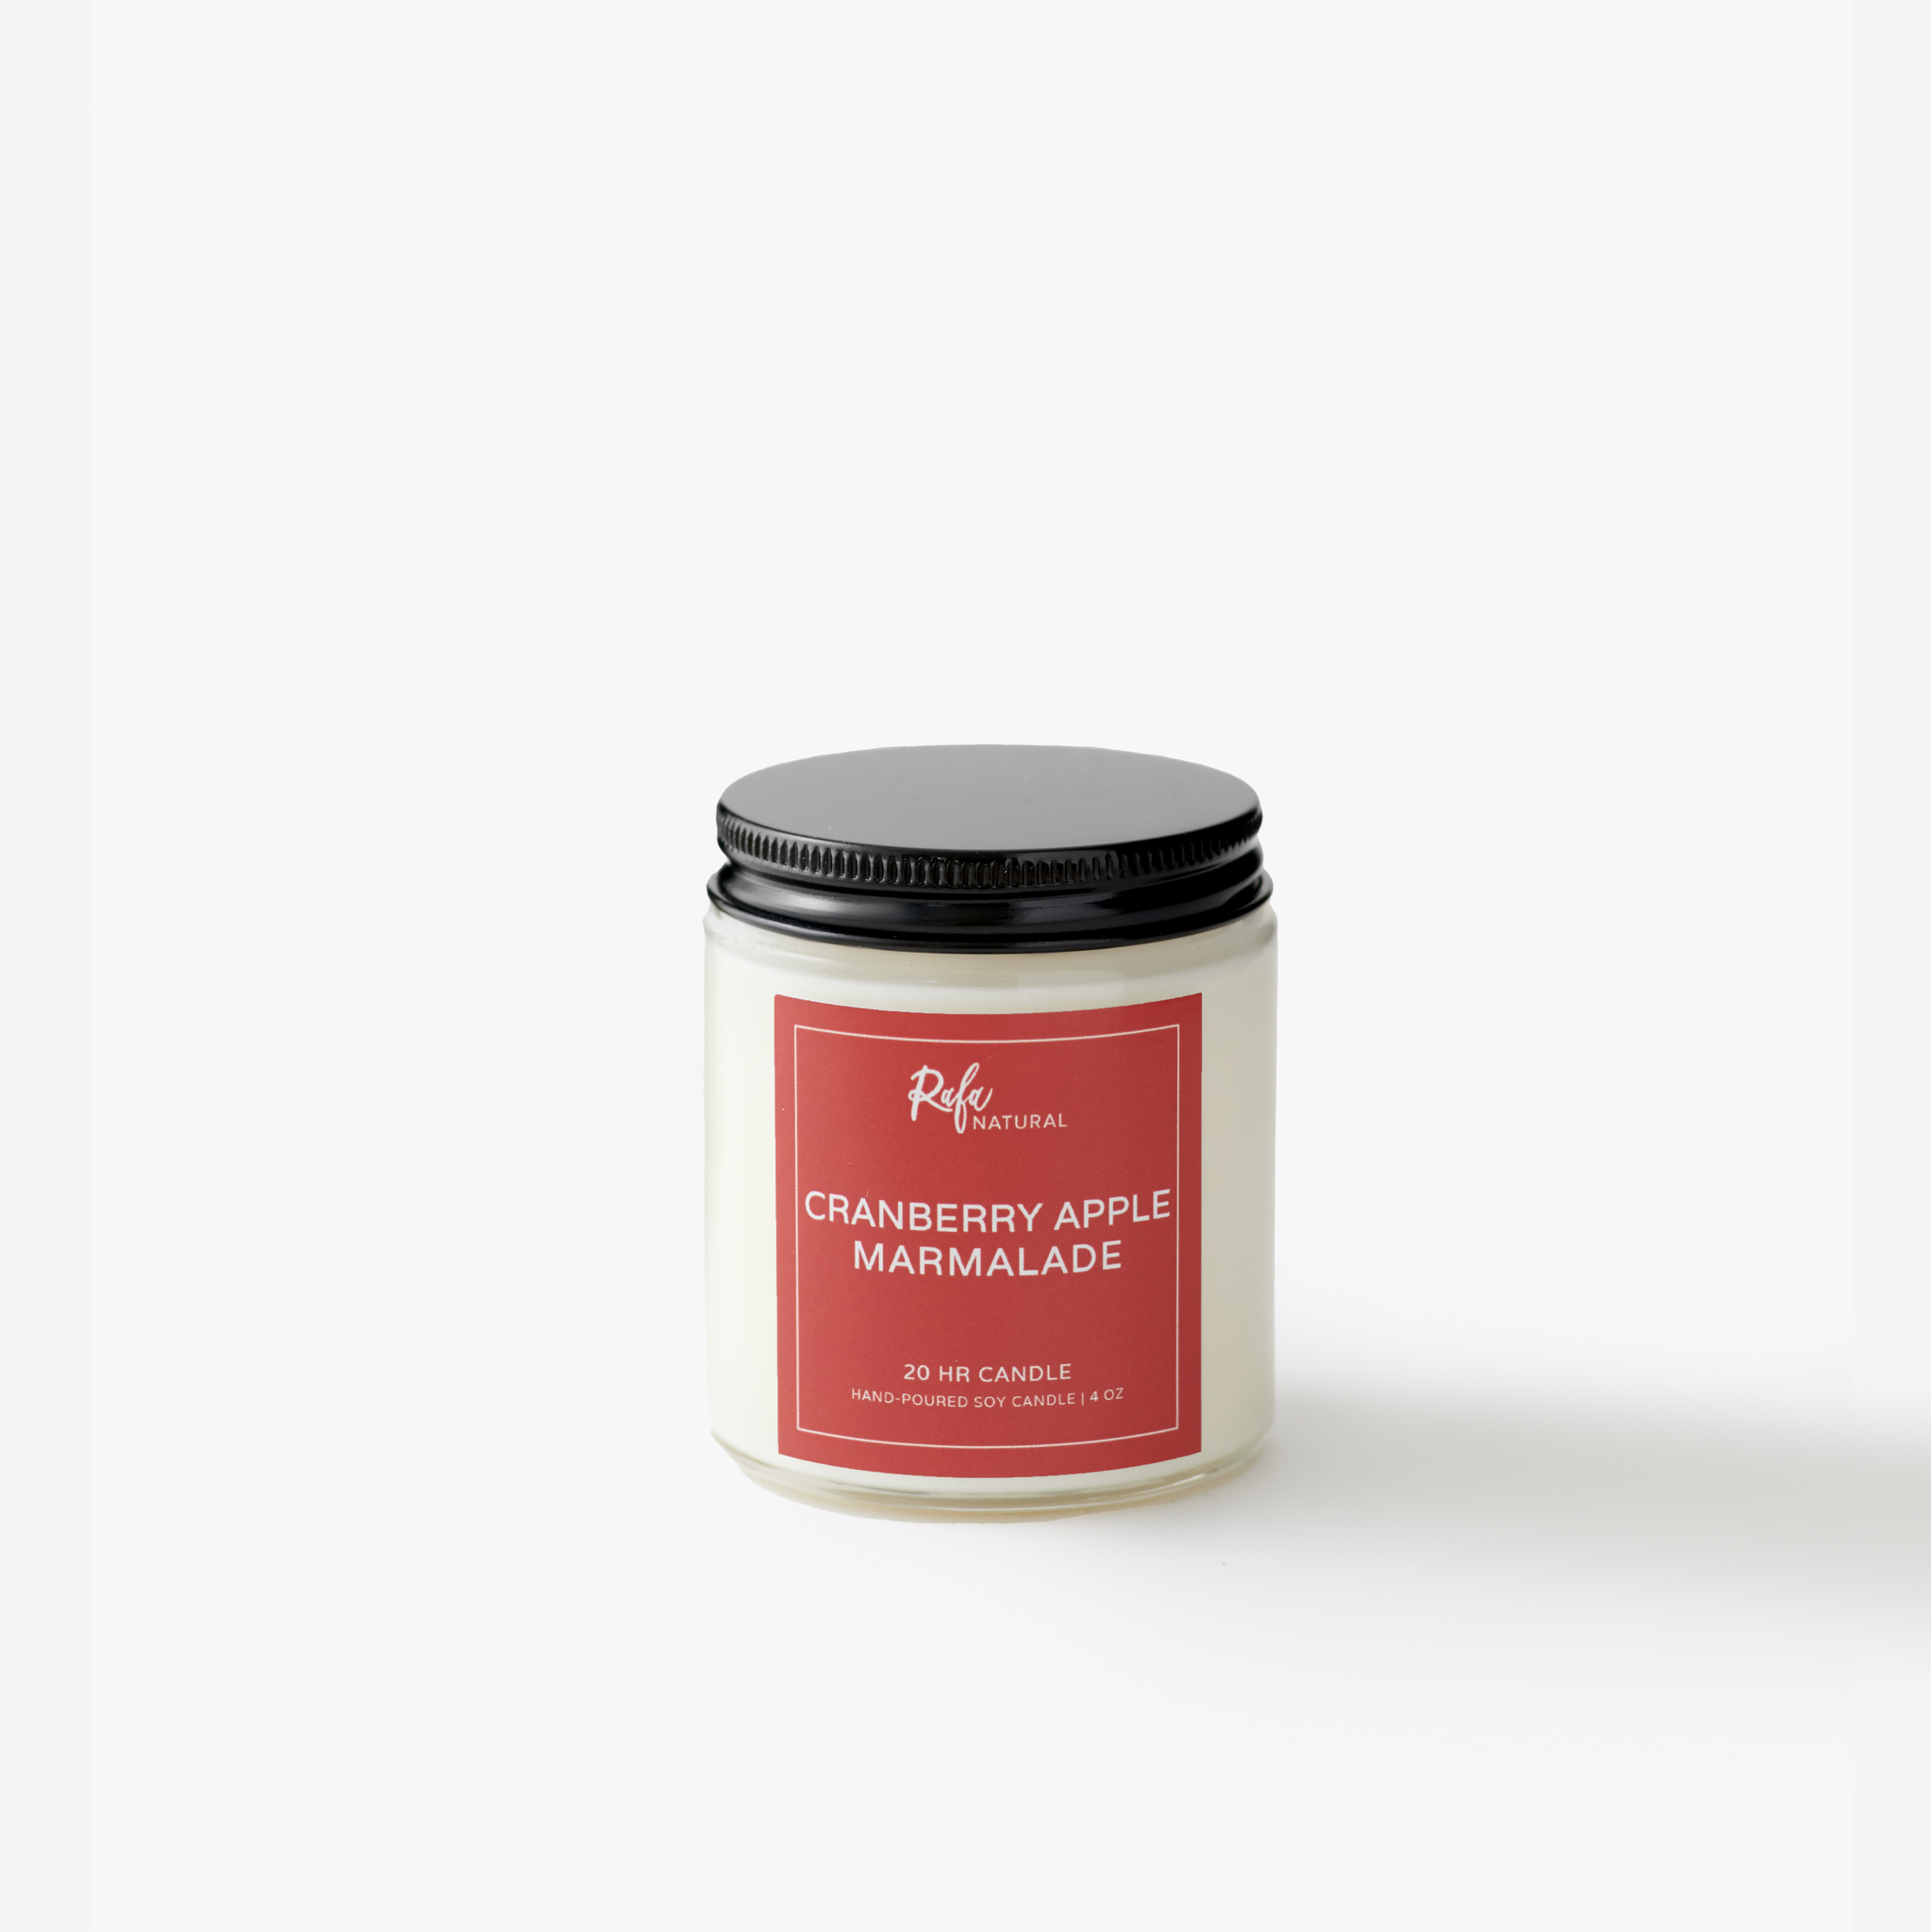 Cranberry Apple Marmalade 20Hr Candle